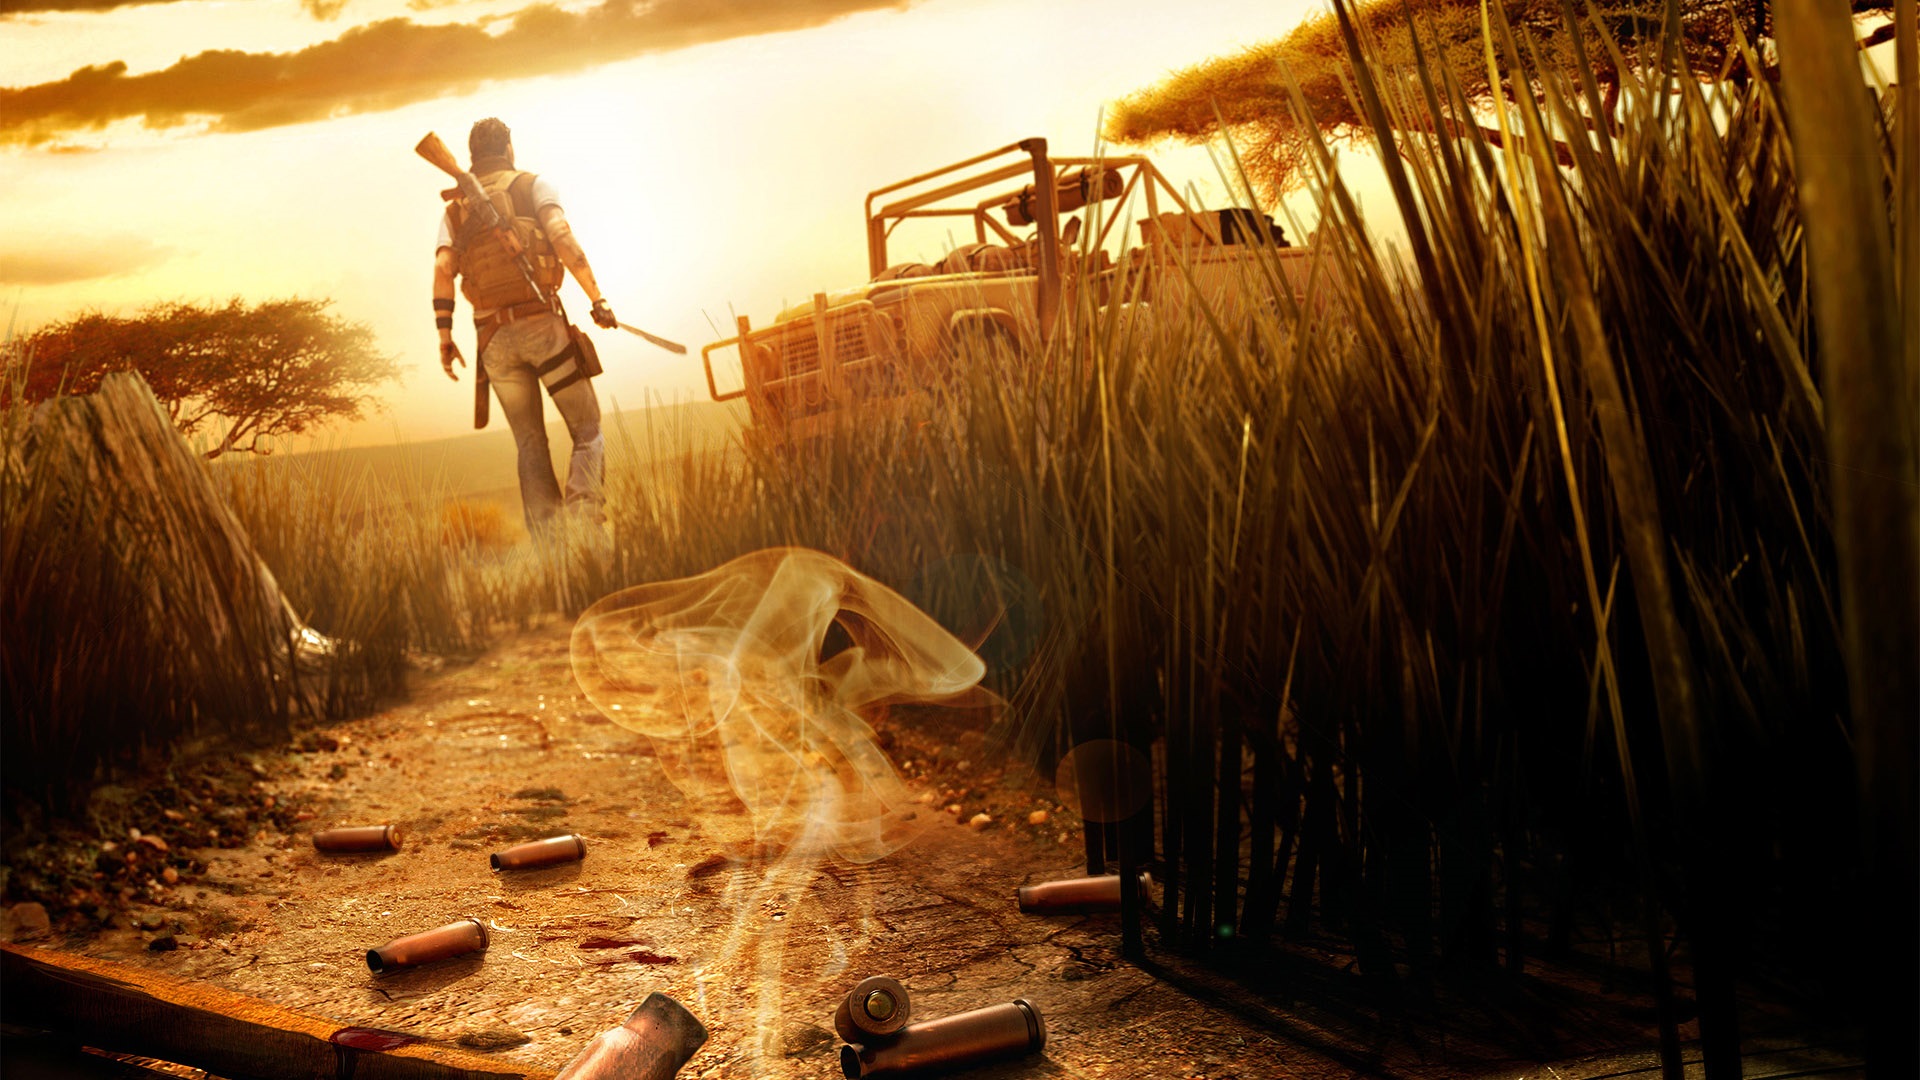 android video game, far cry 2